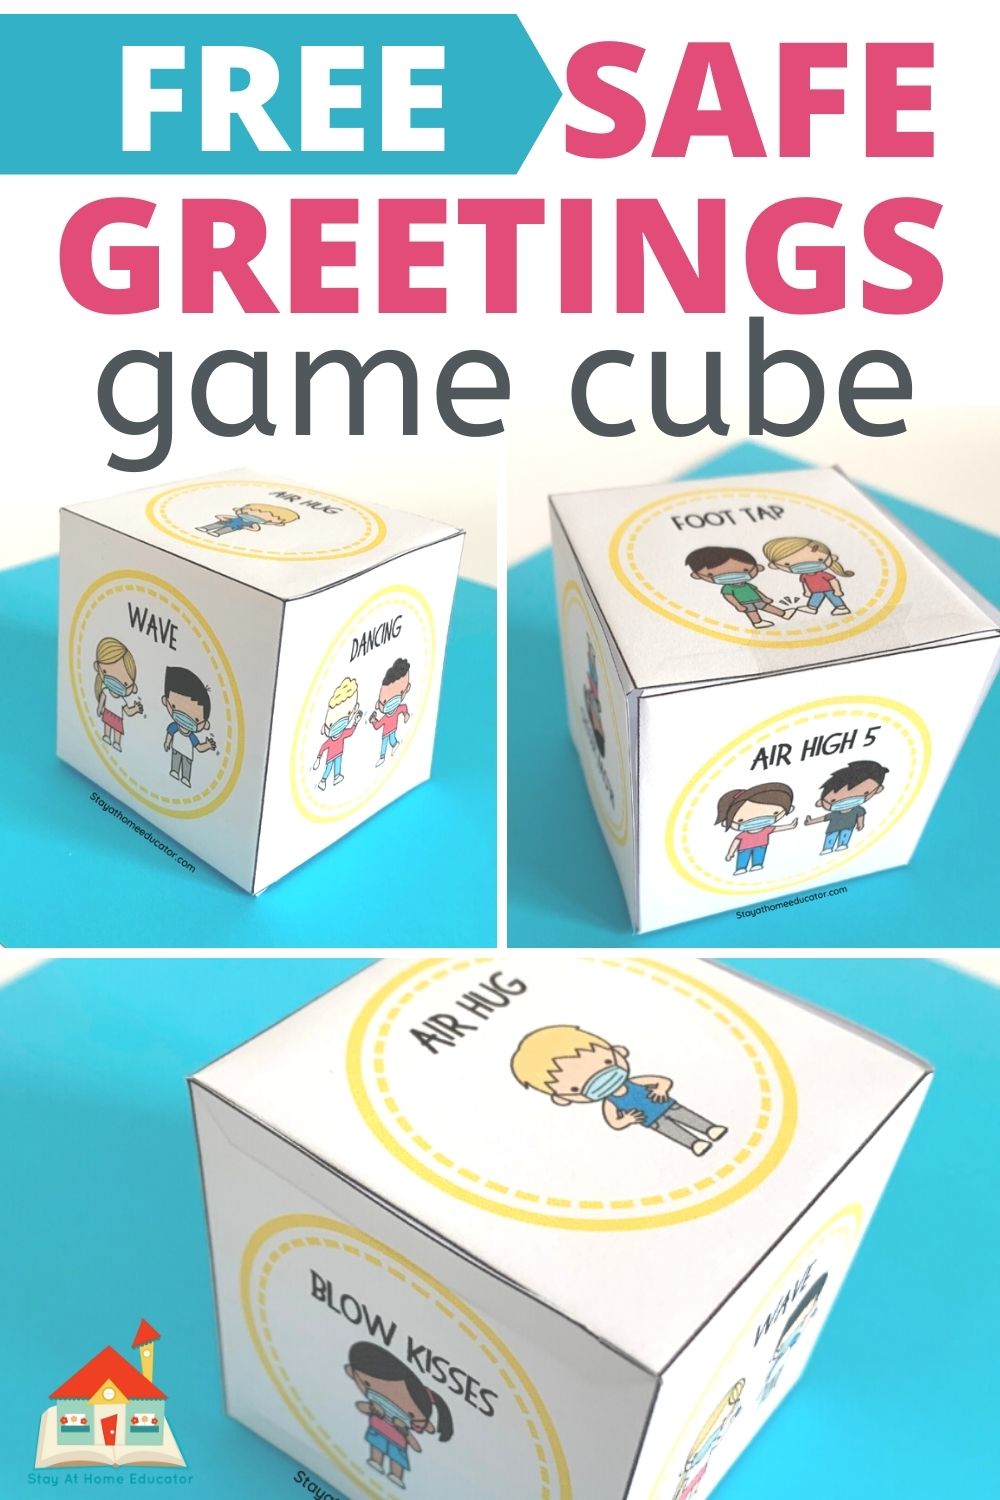 fun activities, including free printables, to teach your preschoolers safe greetings